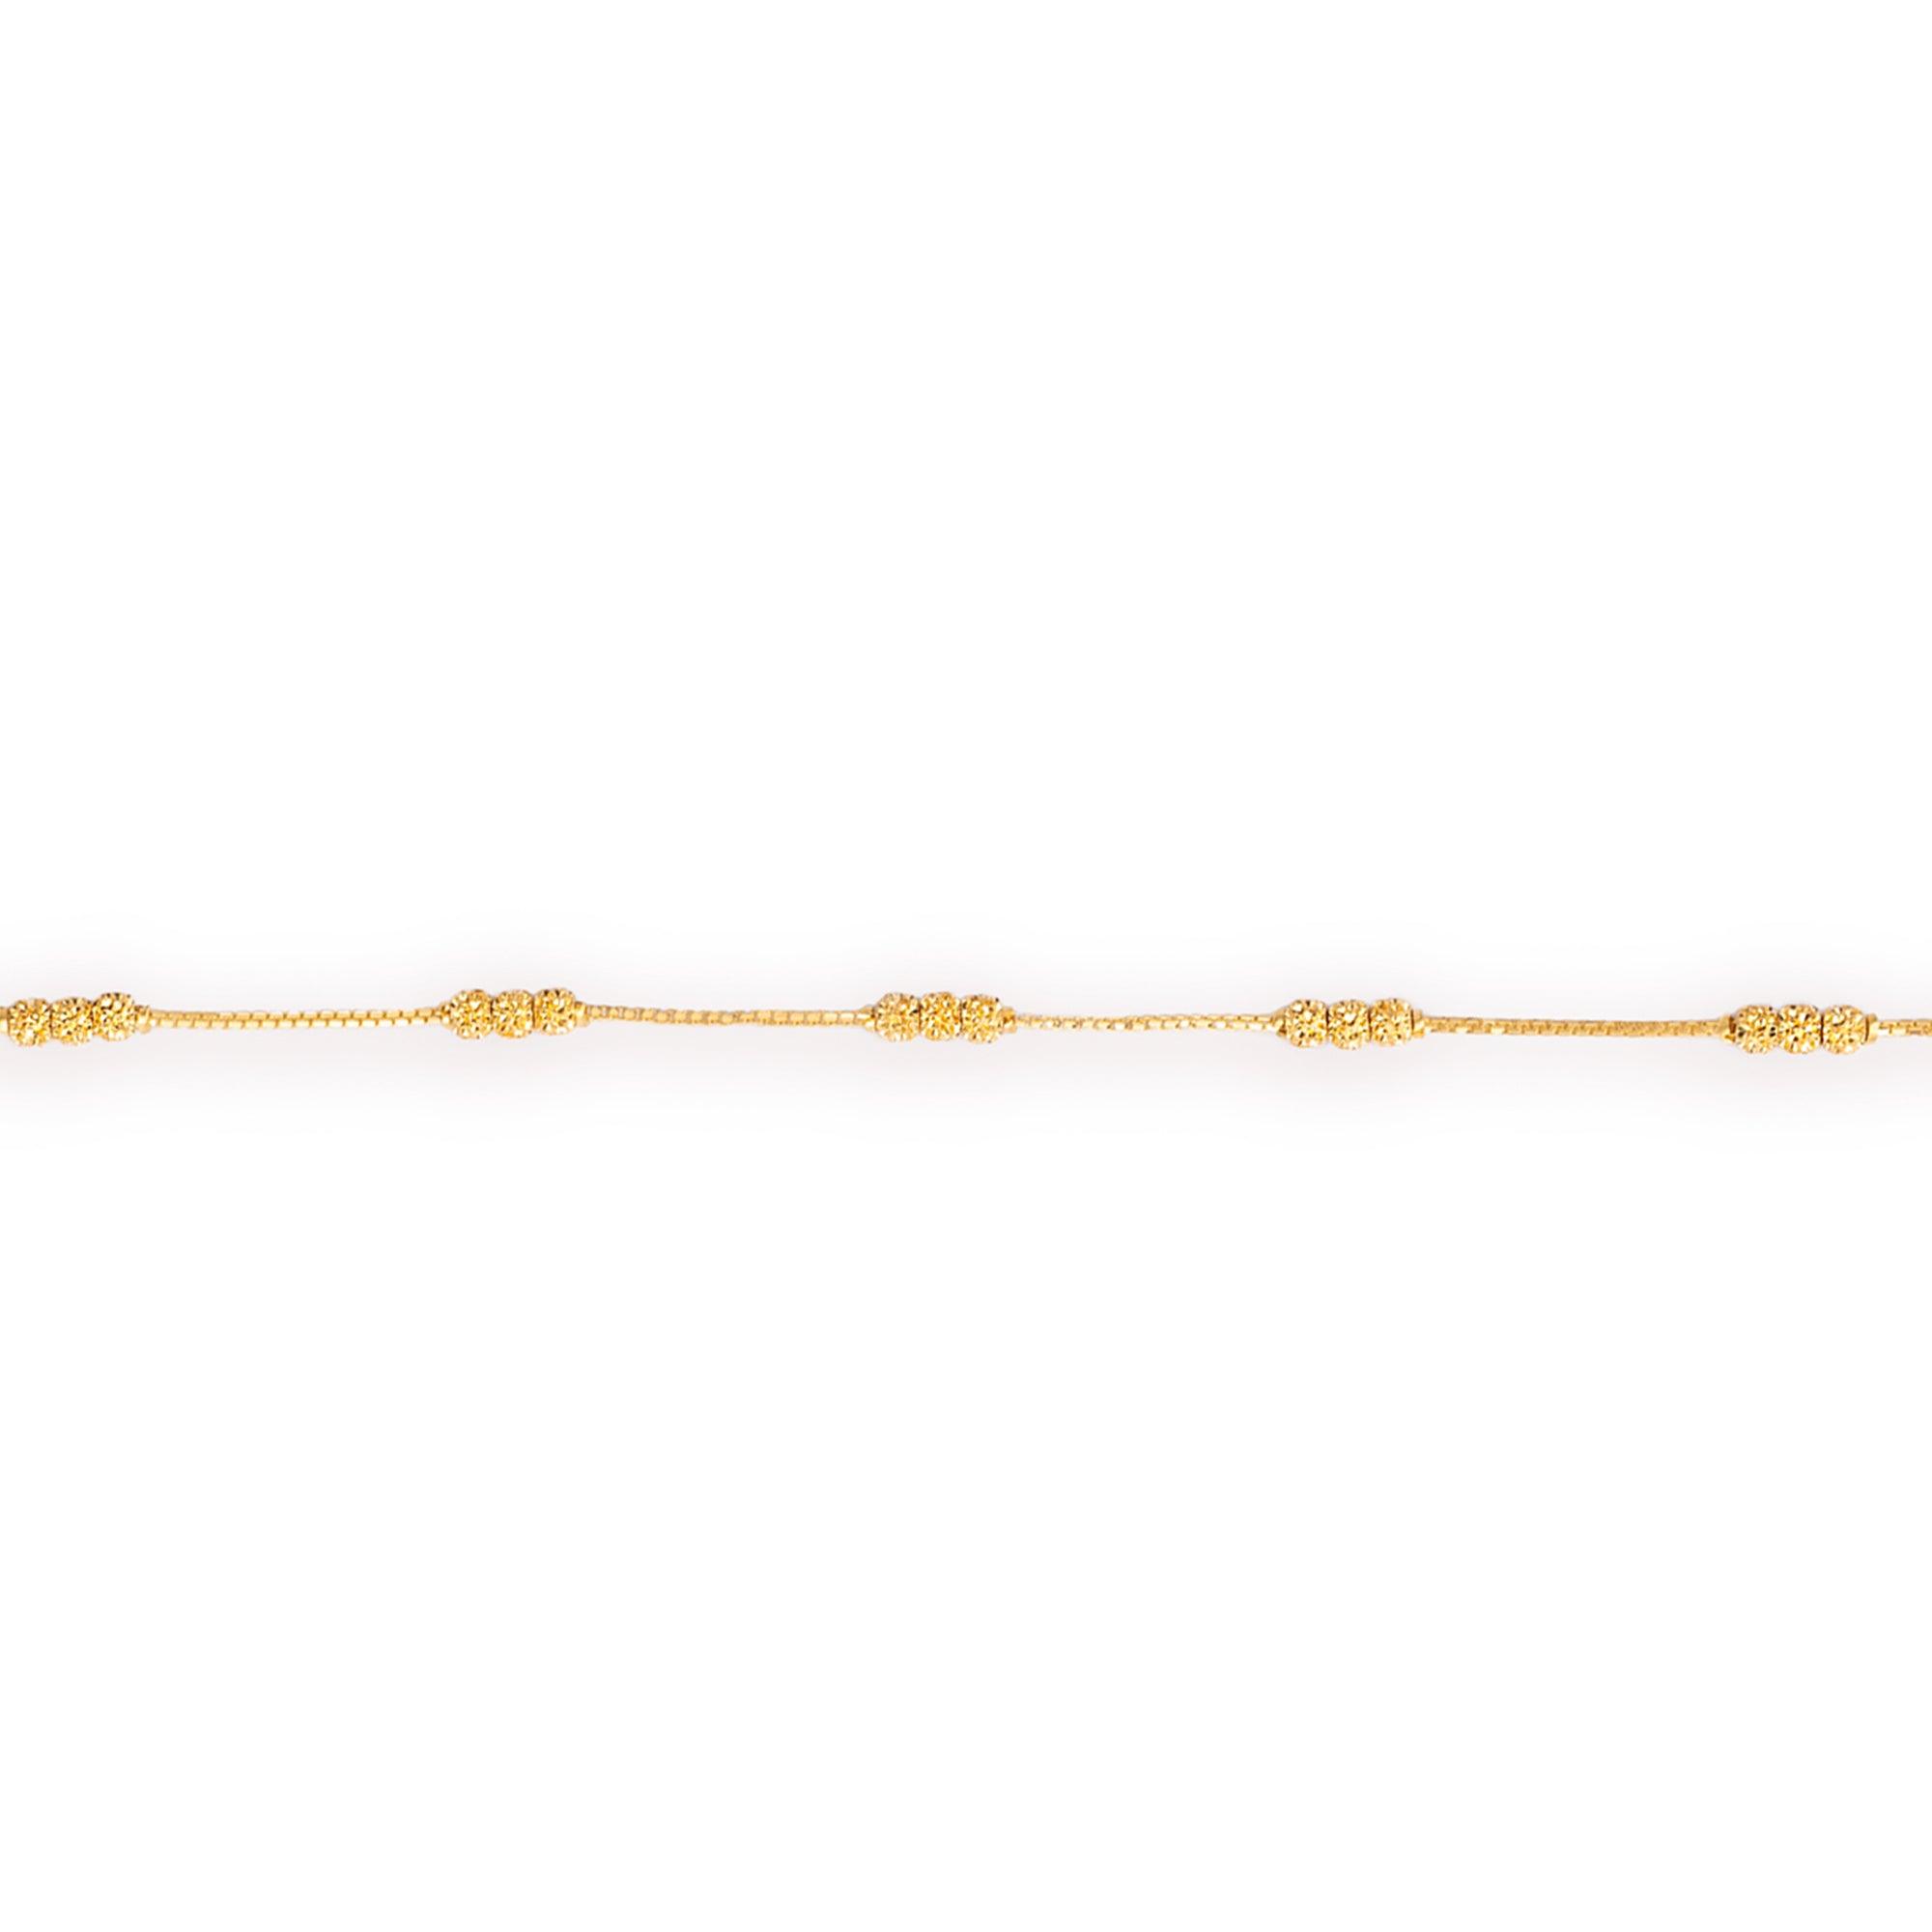 22ct Gold Box Chain Bracelet with Triple Diamond Cut Gold Beads and Hook Clasp (3.2g) LBR-8475b